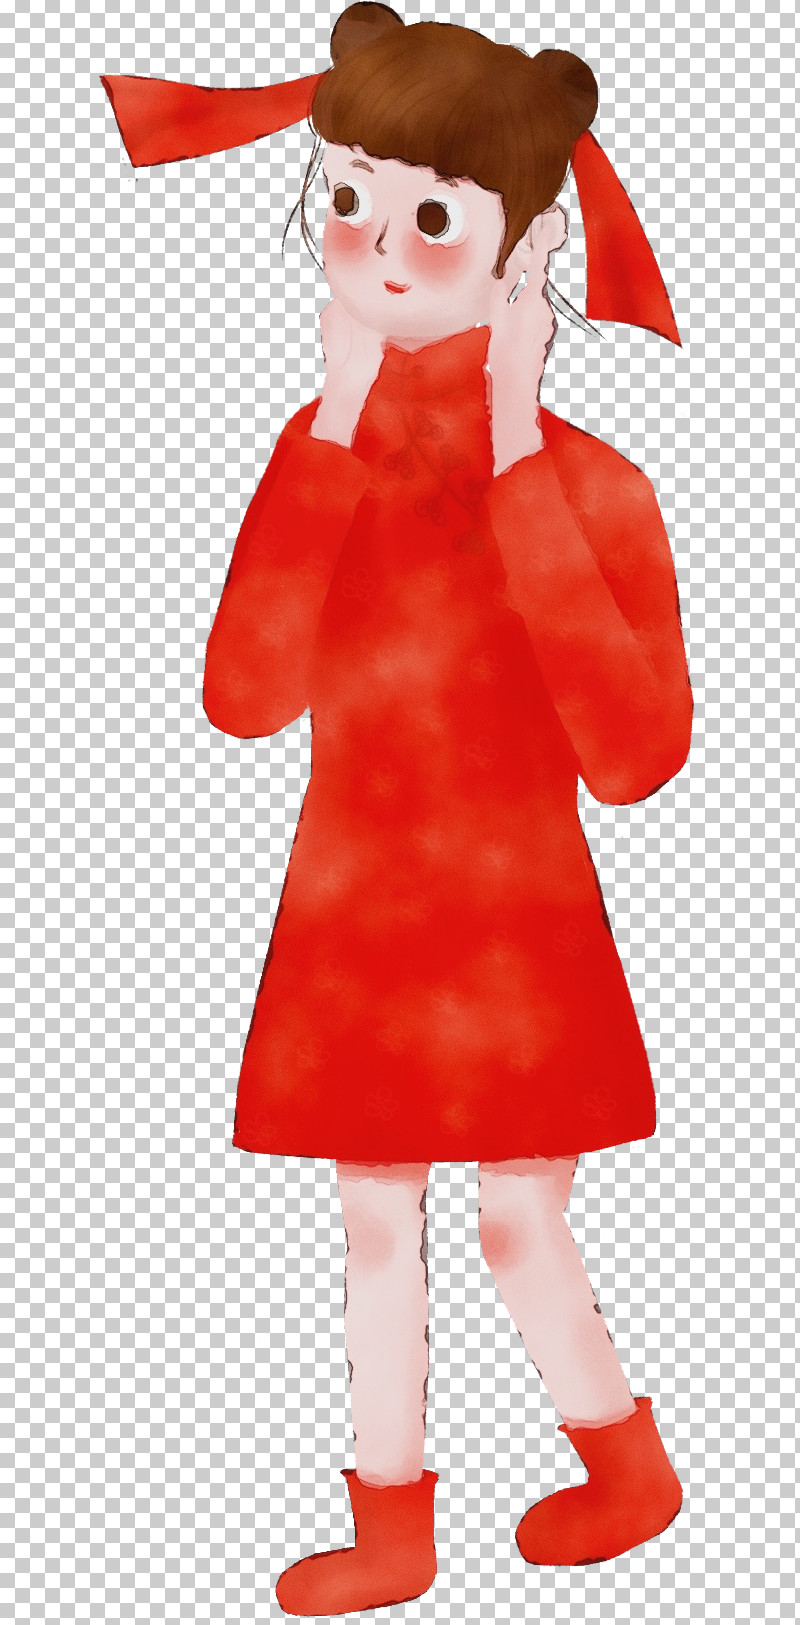 Clothing Red Costume Outerwear Dress PNG, Clipart, Clothing, Costume, Dress, Outerwear, Paint Free PNG Download